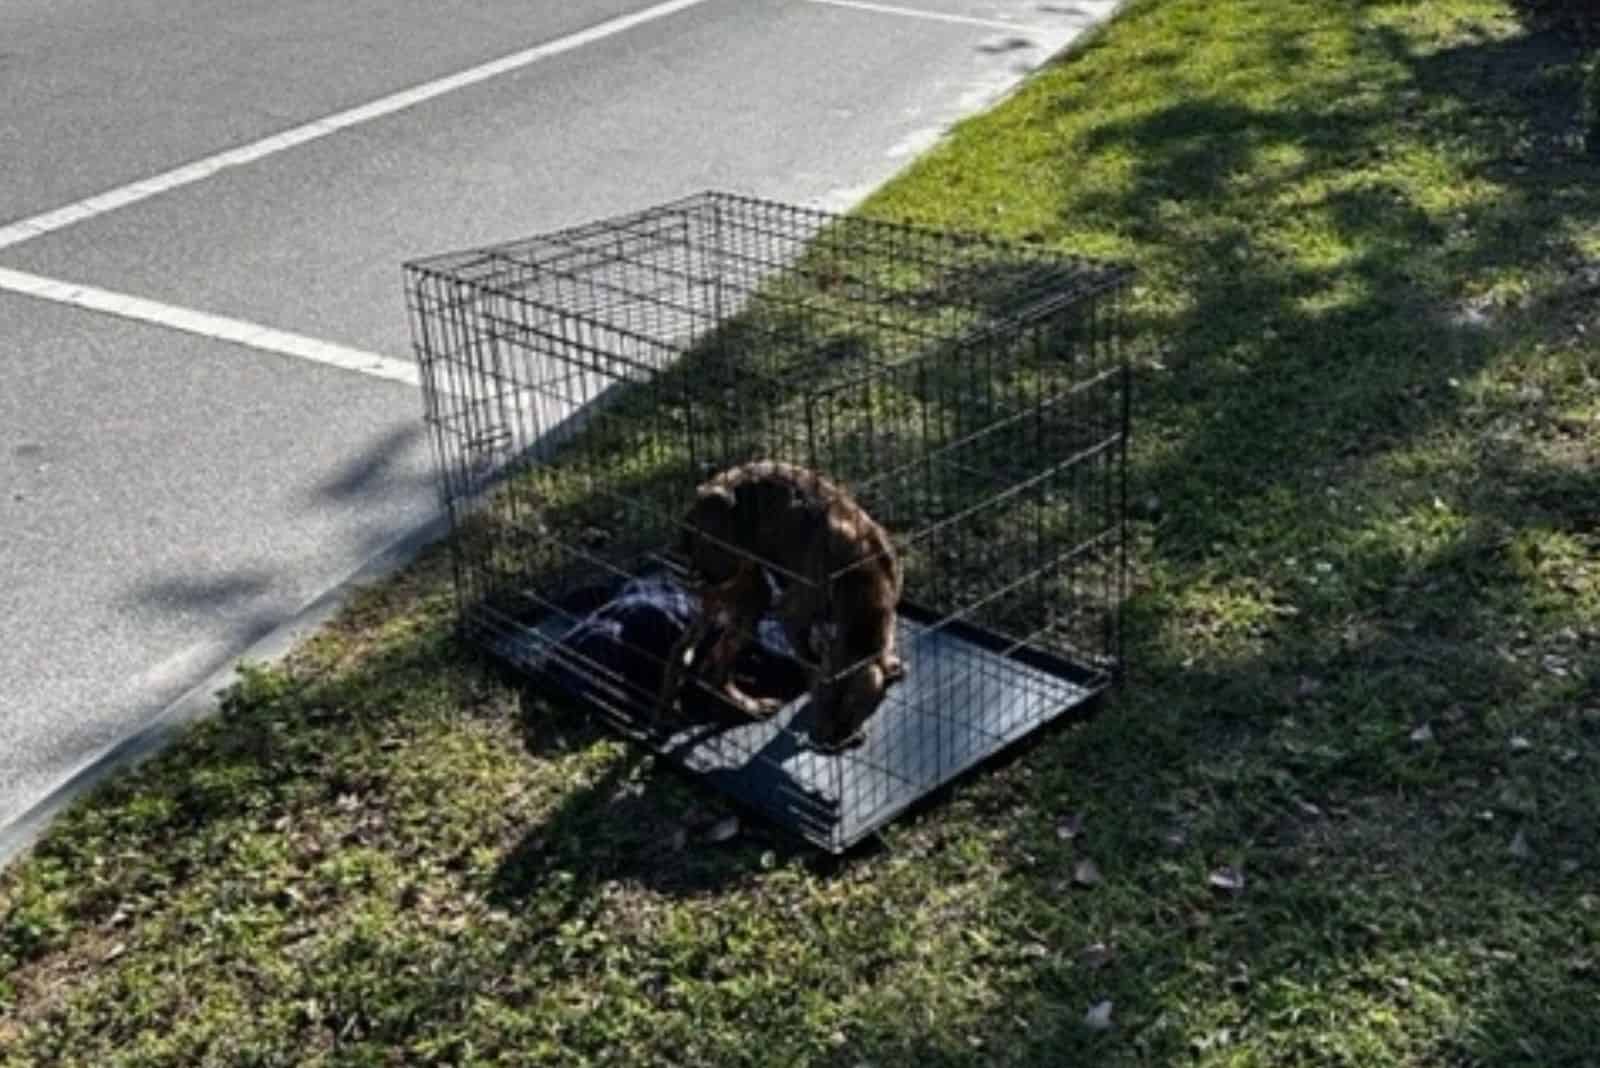 dog in a cage next to a road